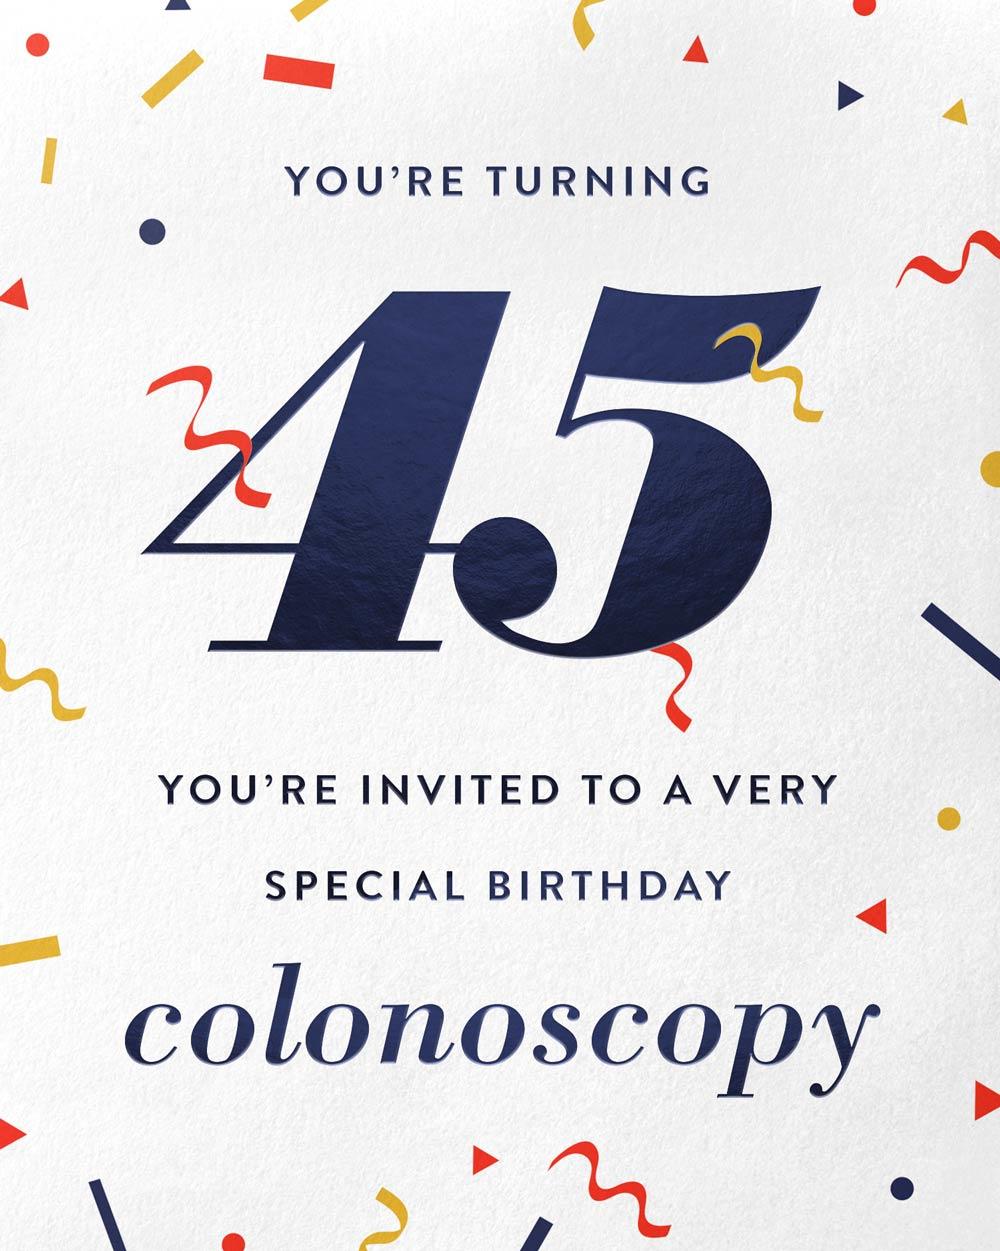 You're turning 45. You're invited to a very special birthday colonoscopy.